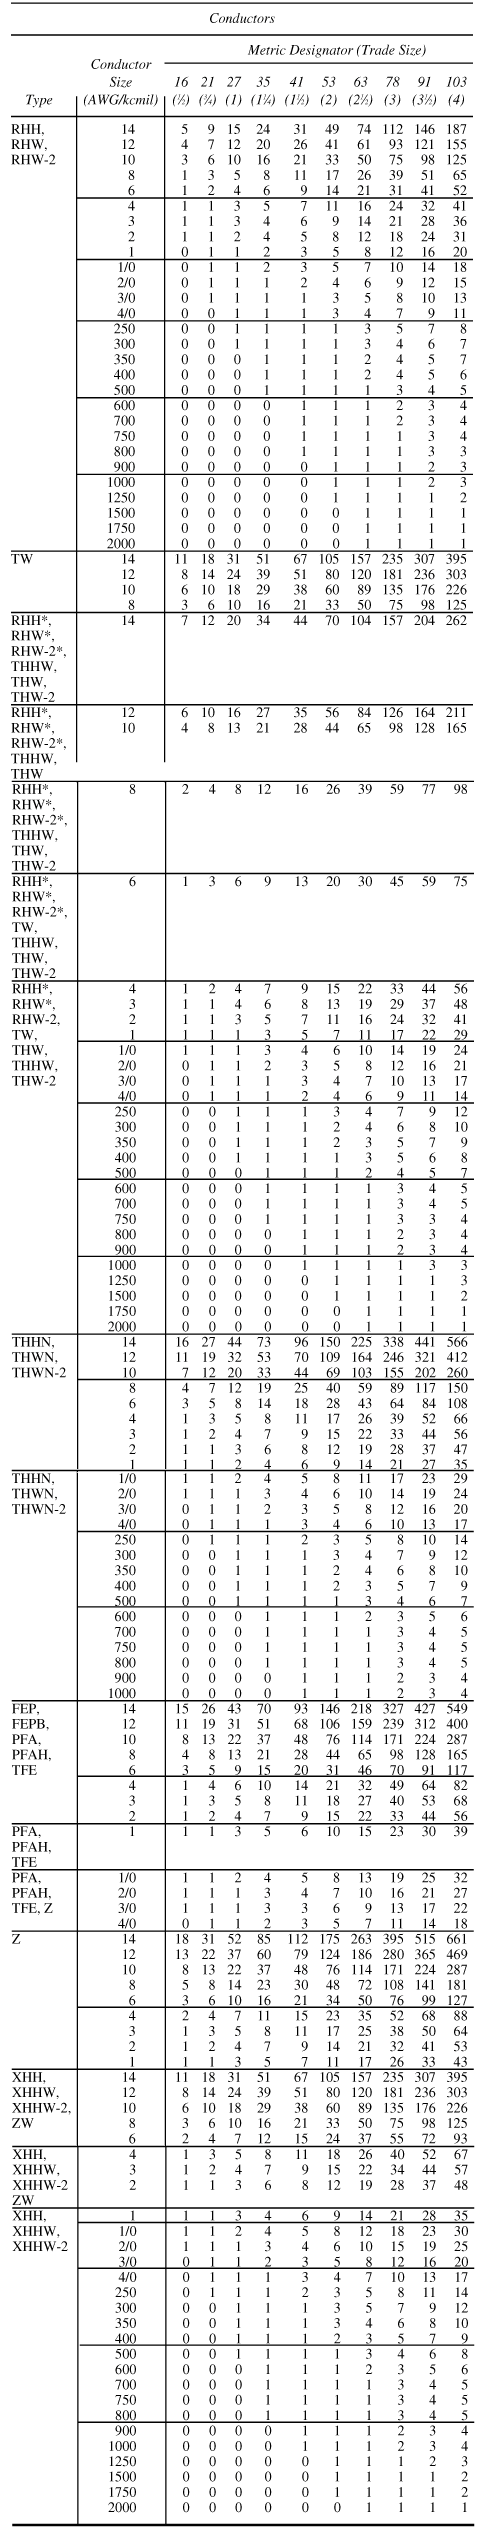 Number Of Wires In Conduit Chart